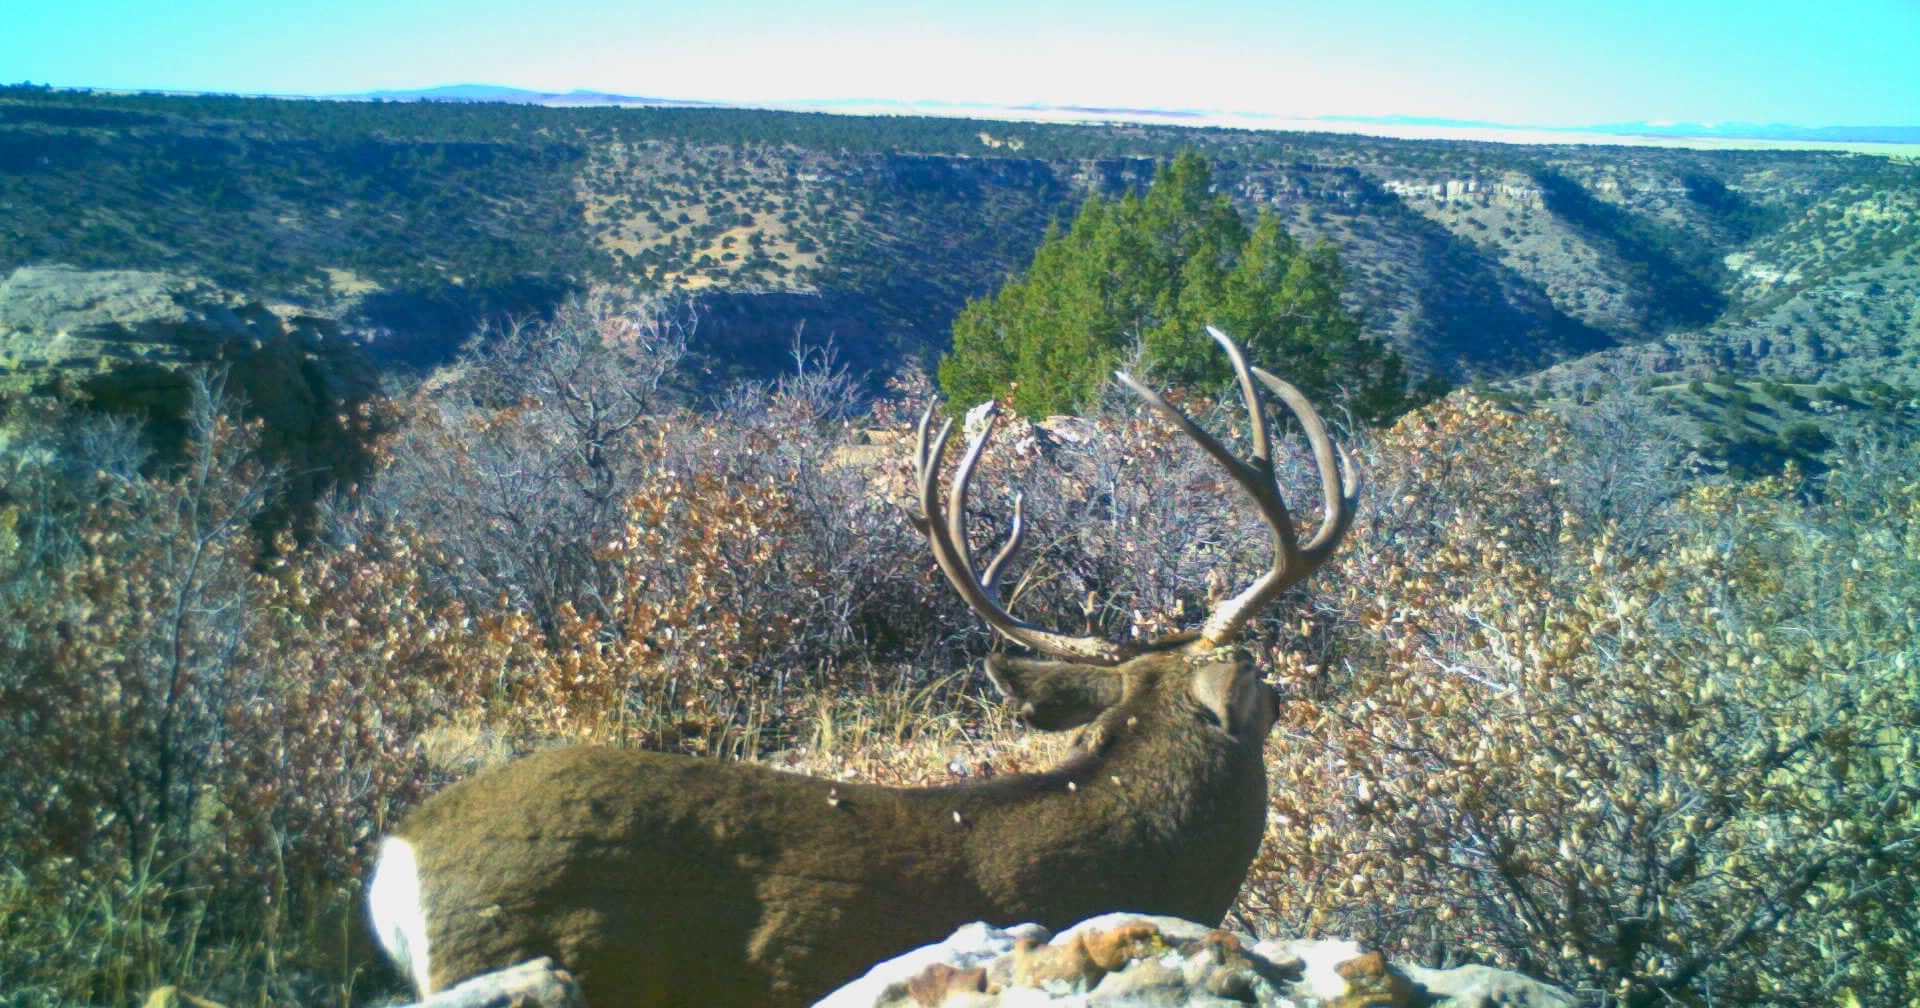 Big Game hunting ranch for sale new mexico rio rojo canyon ranch